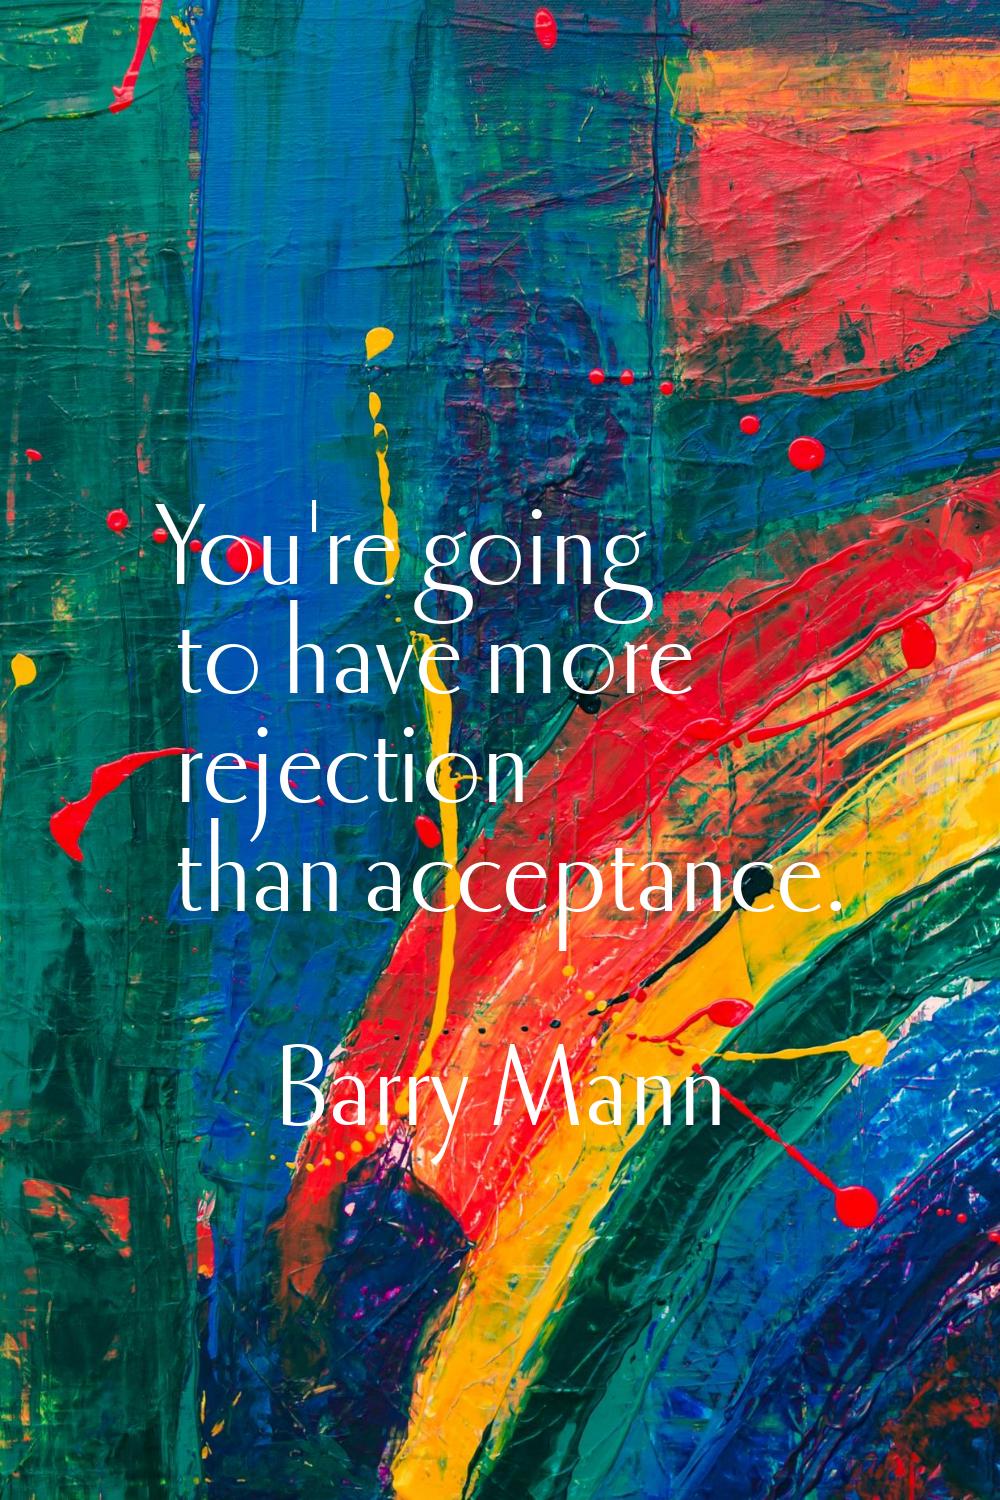 You're going to have more rejection than acceptance.